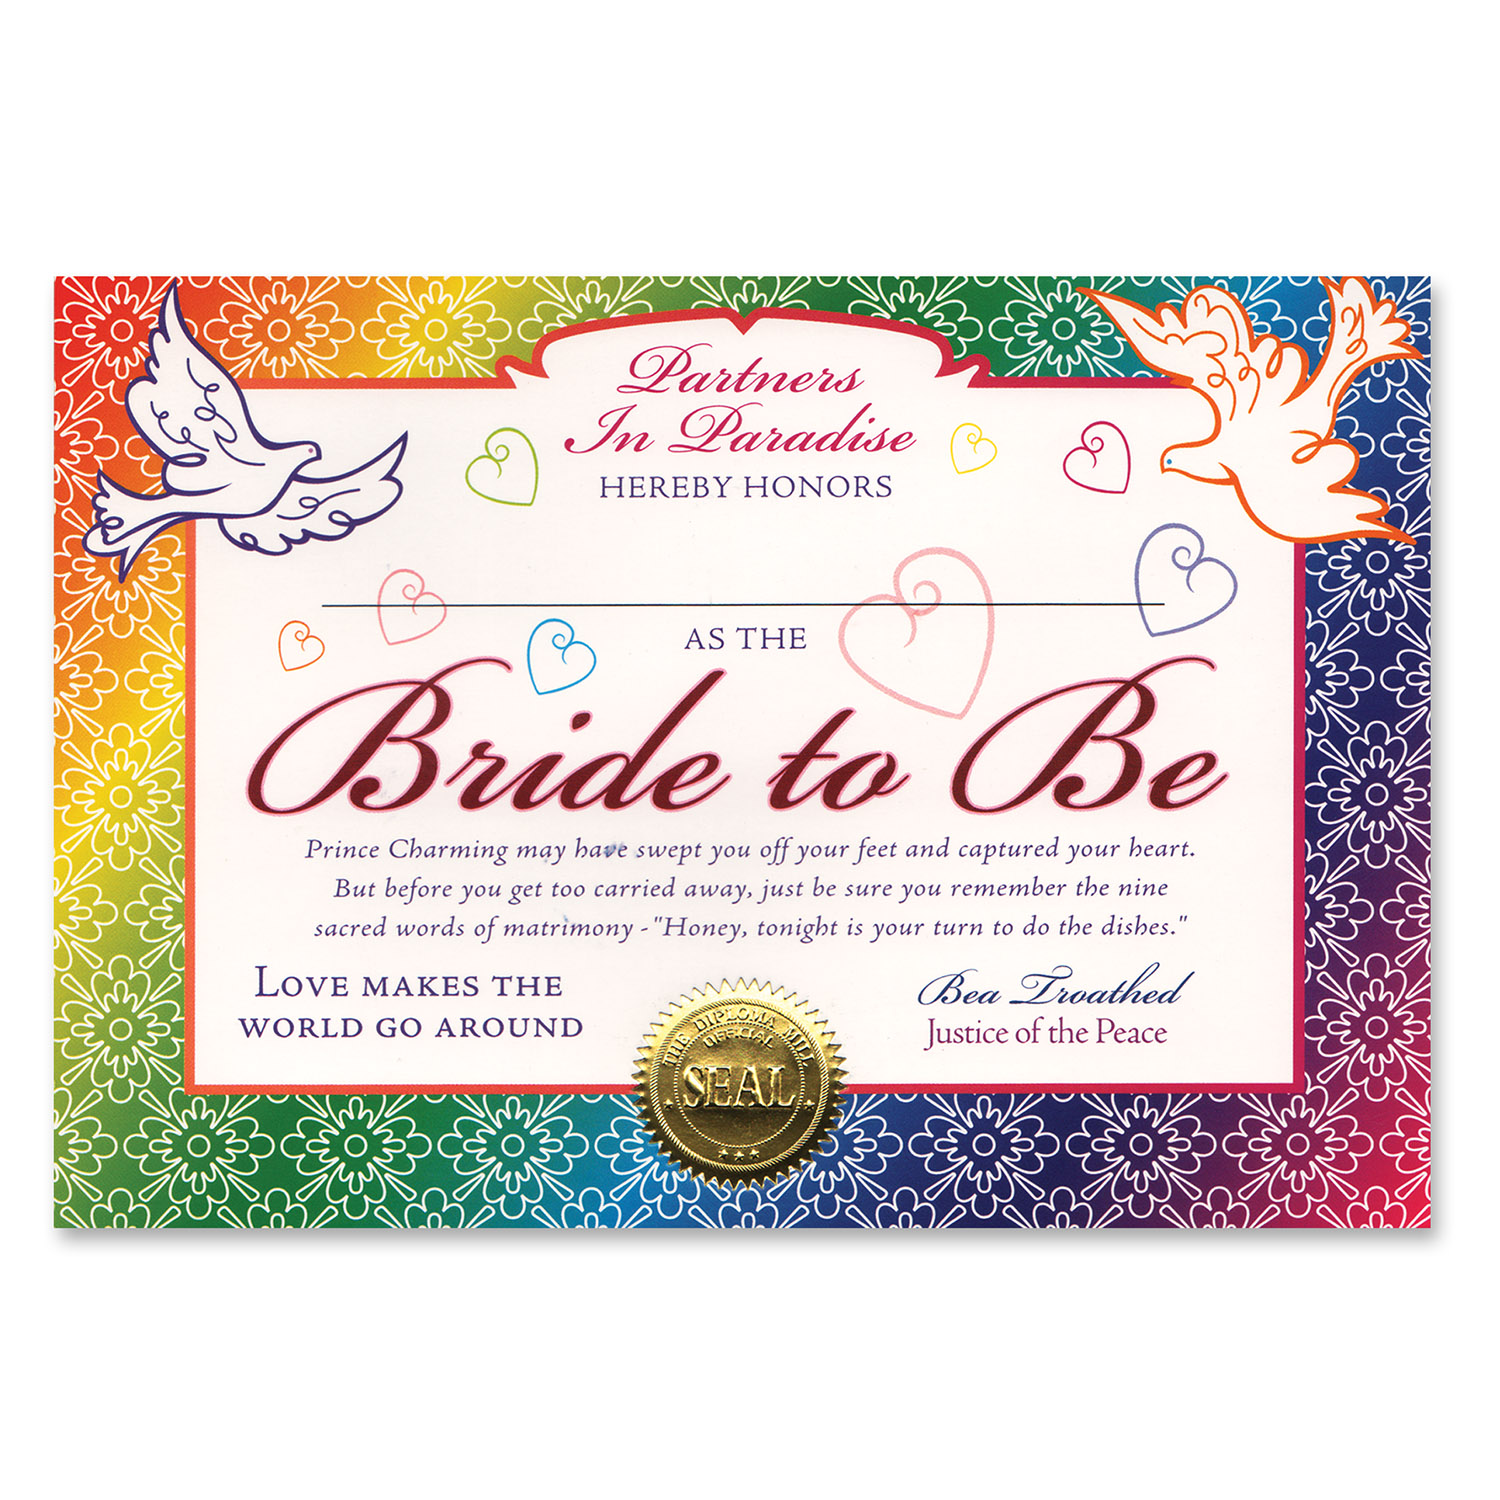 Bride To Be Certificate